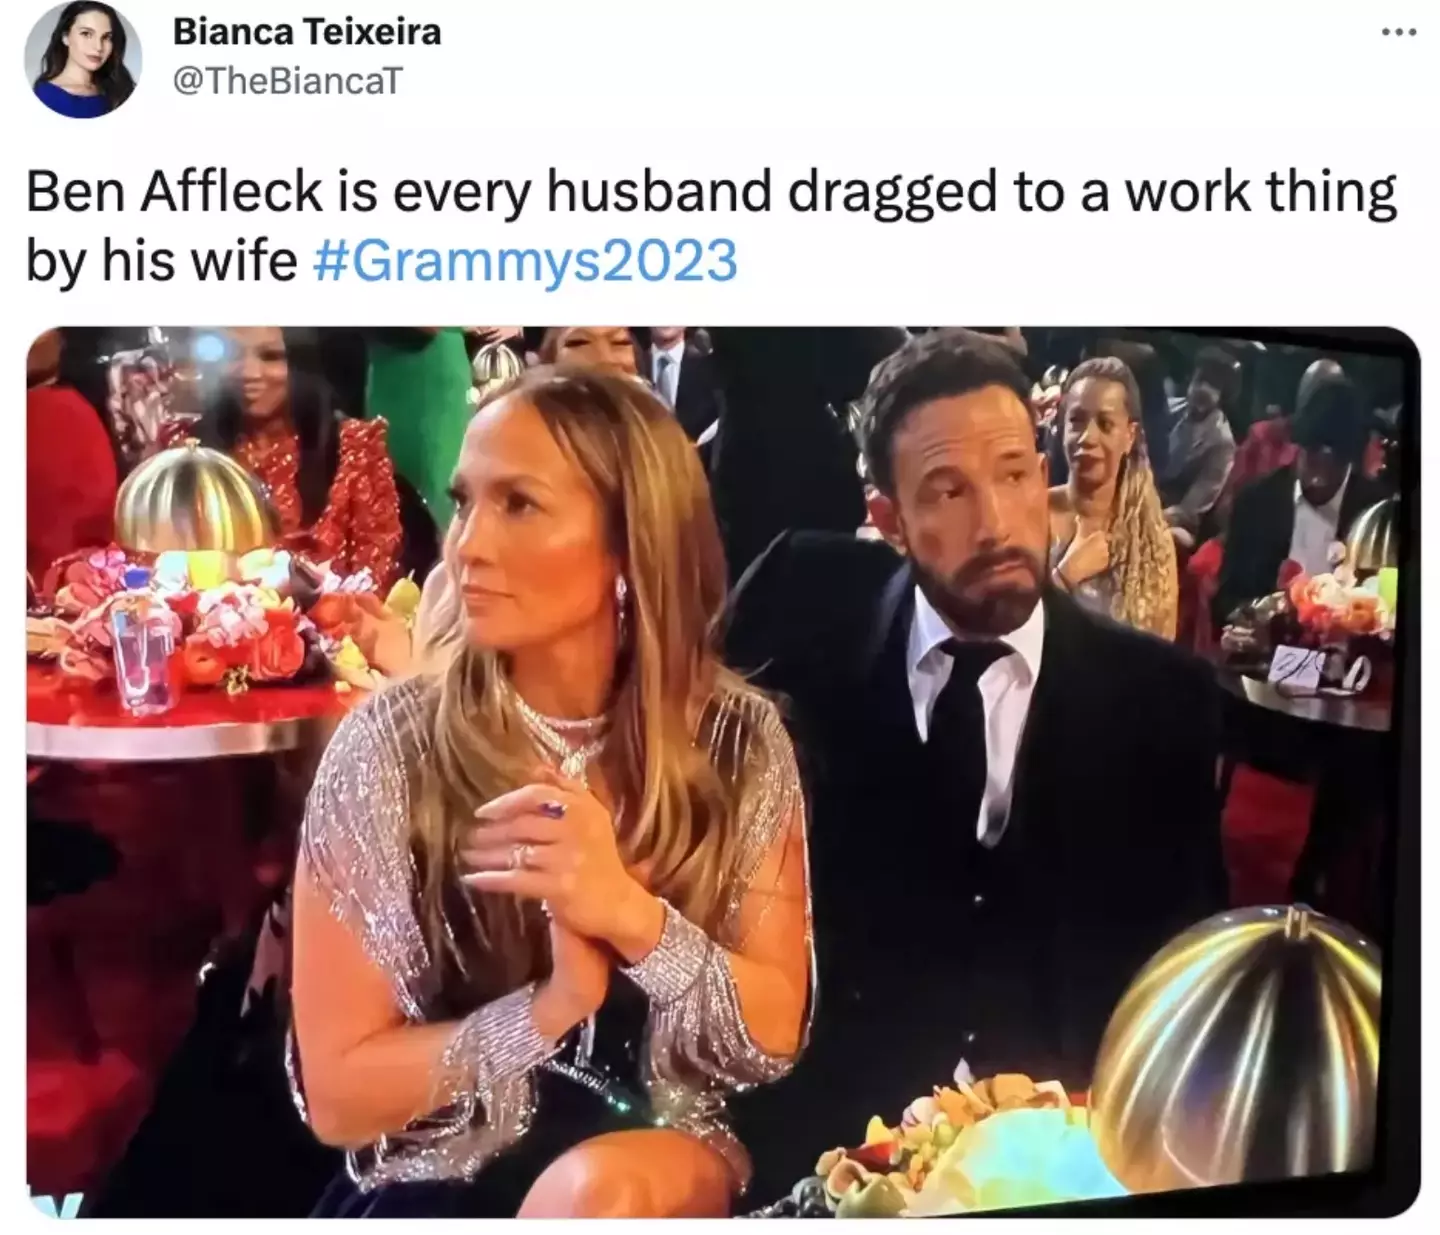 Affleck became a meme earlier this year after his Grammys appearance.